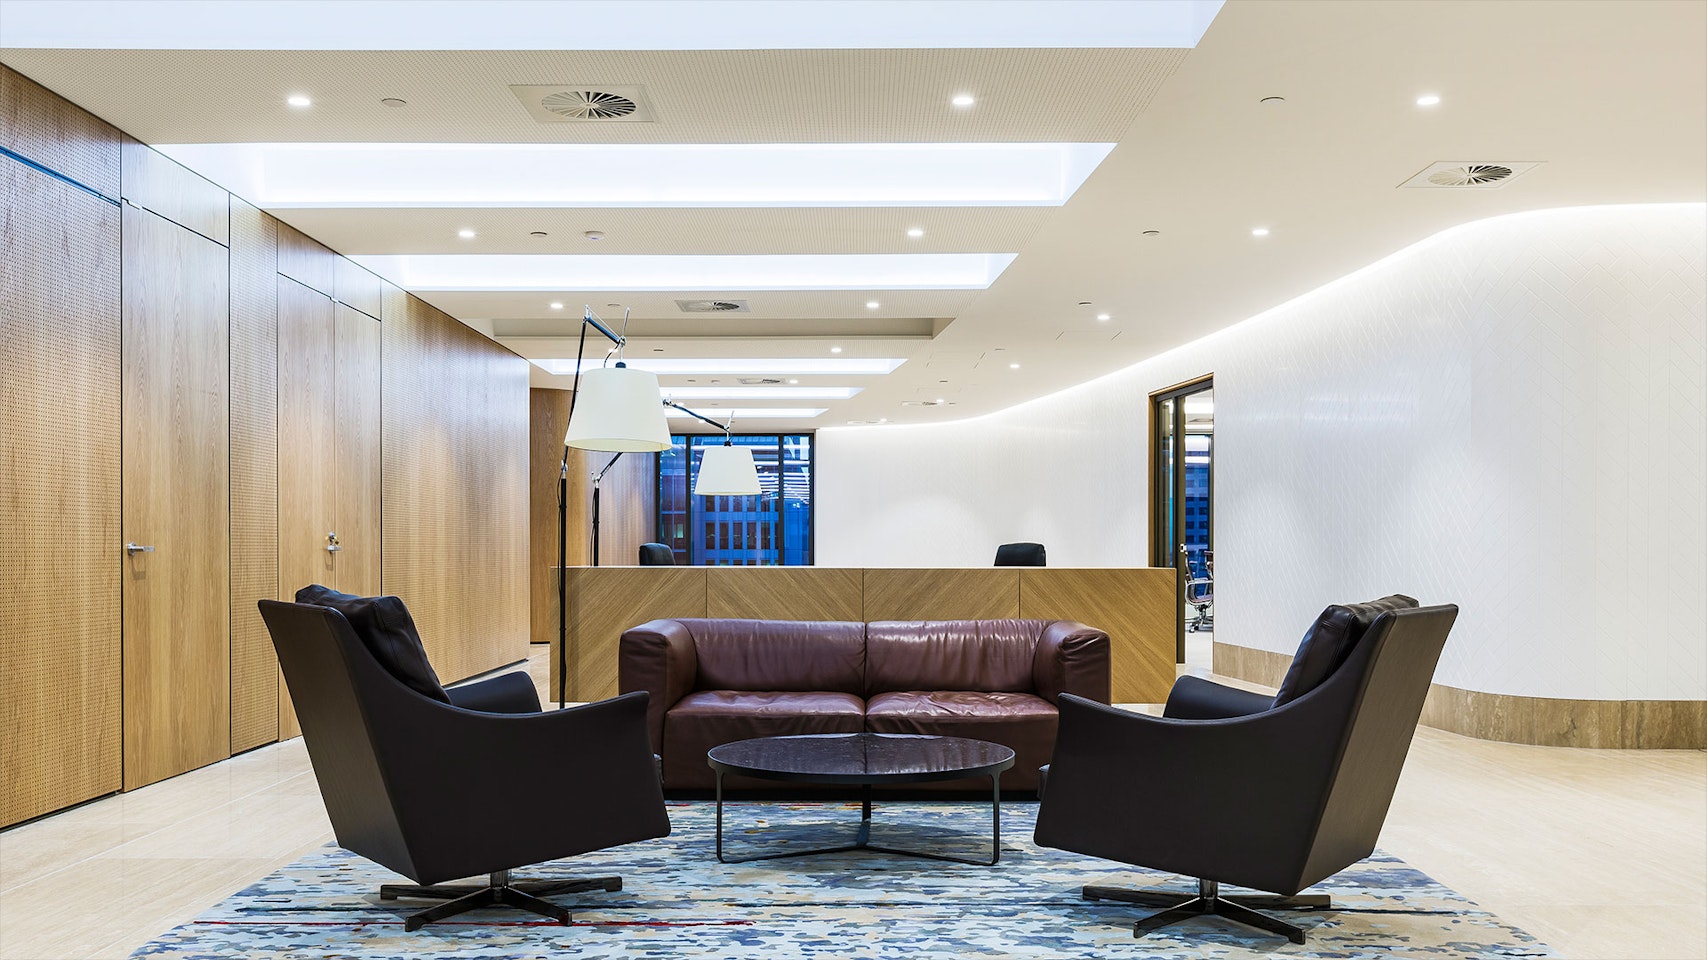 Primo X2 LED strip in application, installed in the DLA Piper Office in Sydney. Primo X2 LED strip mounted discreetly in the coves provide an abundance of illumination to the DLA Piper trafficable areas. 